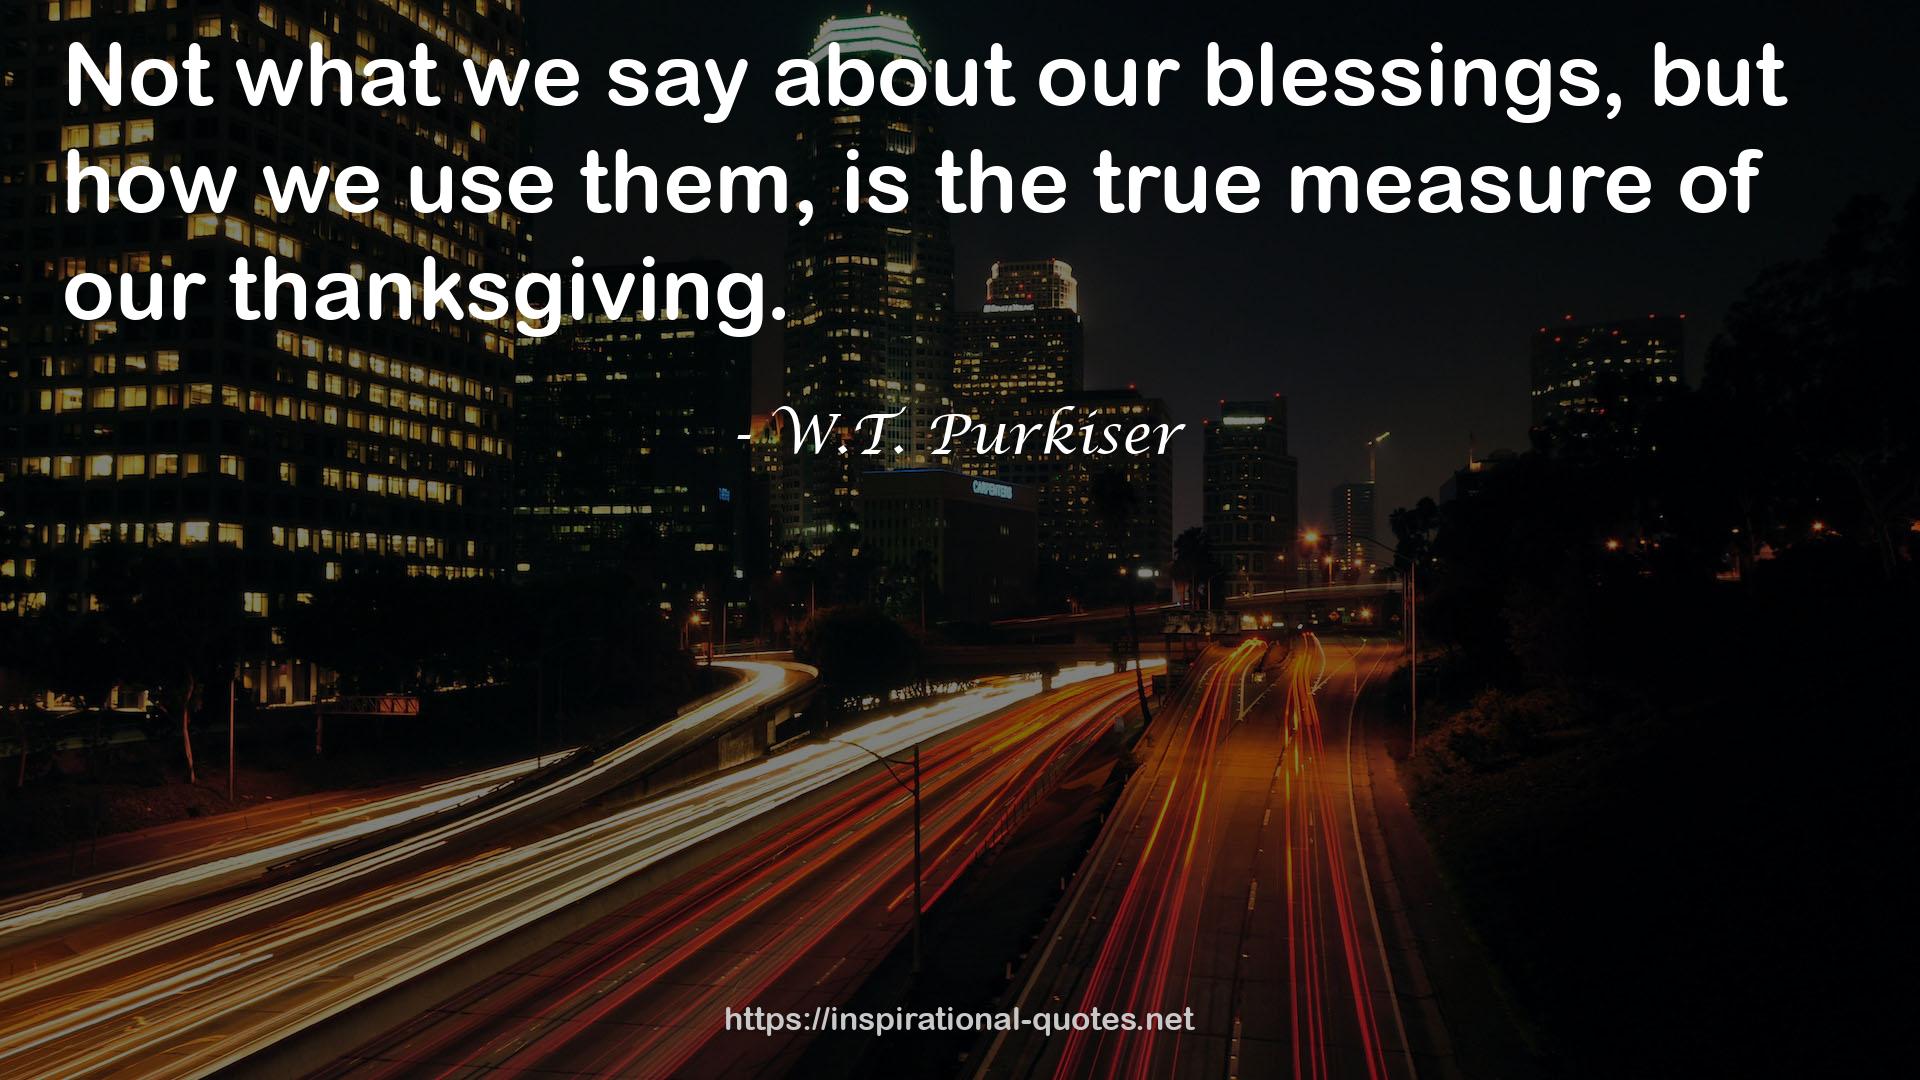 W.T. Purkiser QUOTES